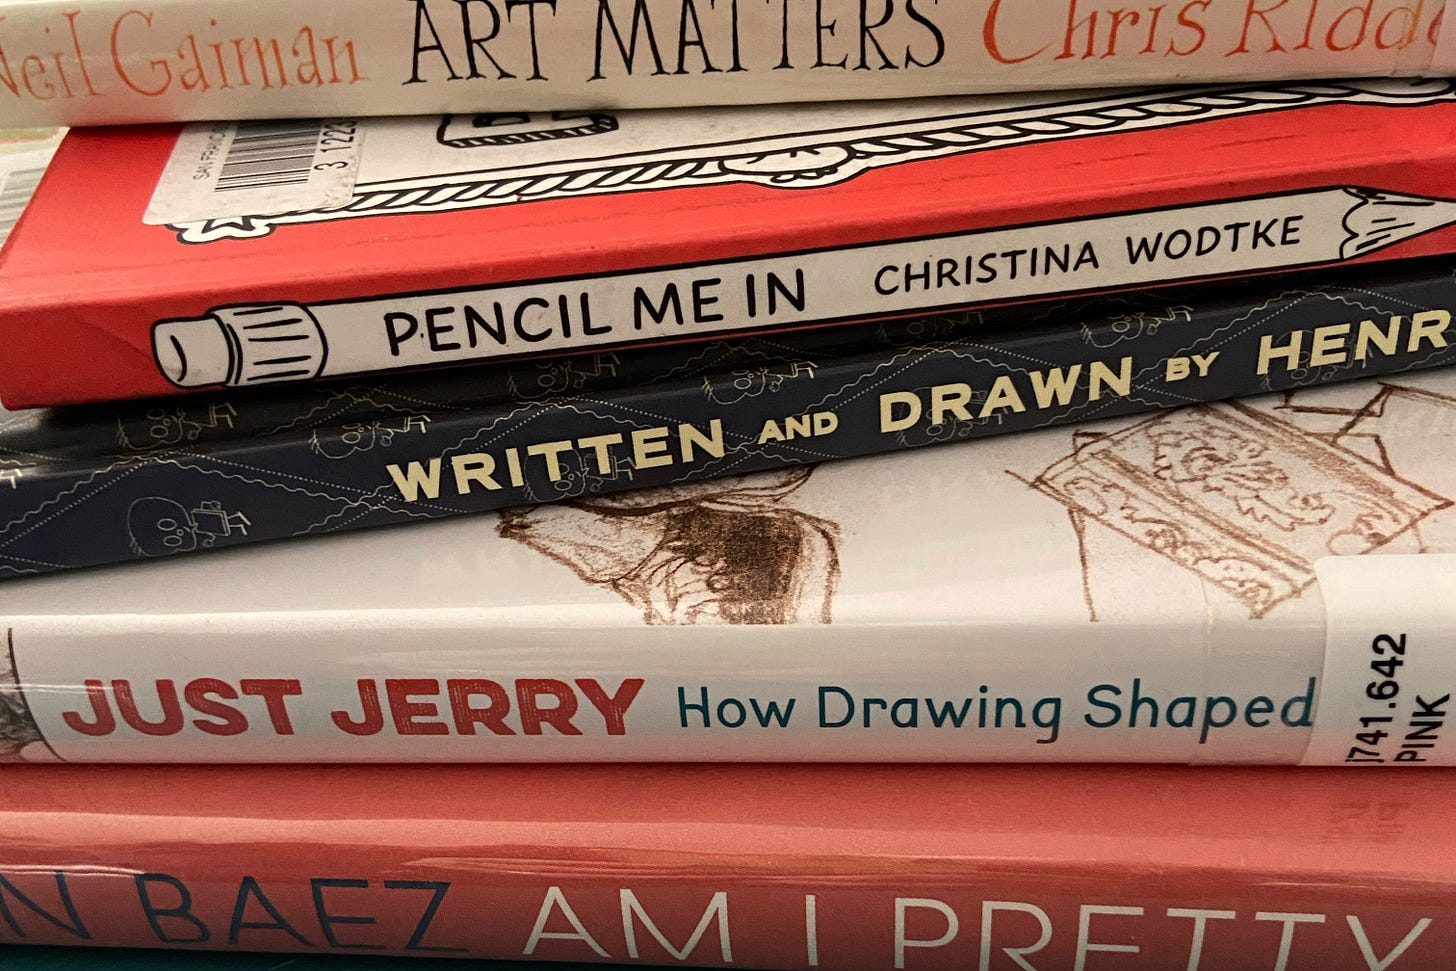 A stack of books recently returned. Two of these are reviewed below.